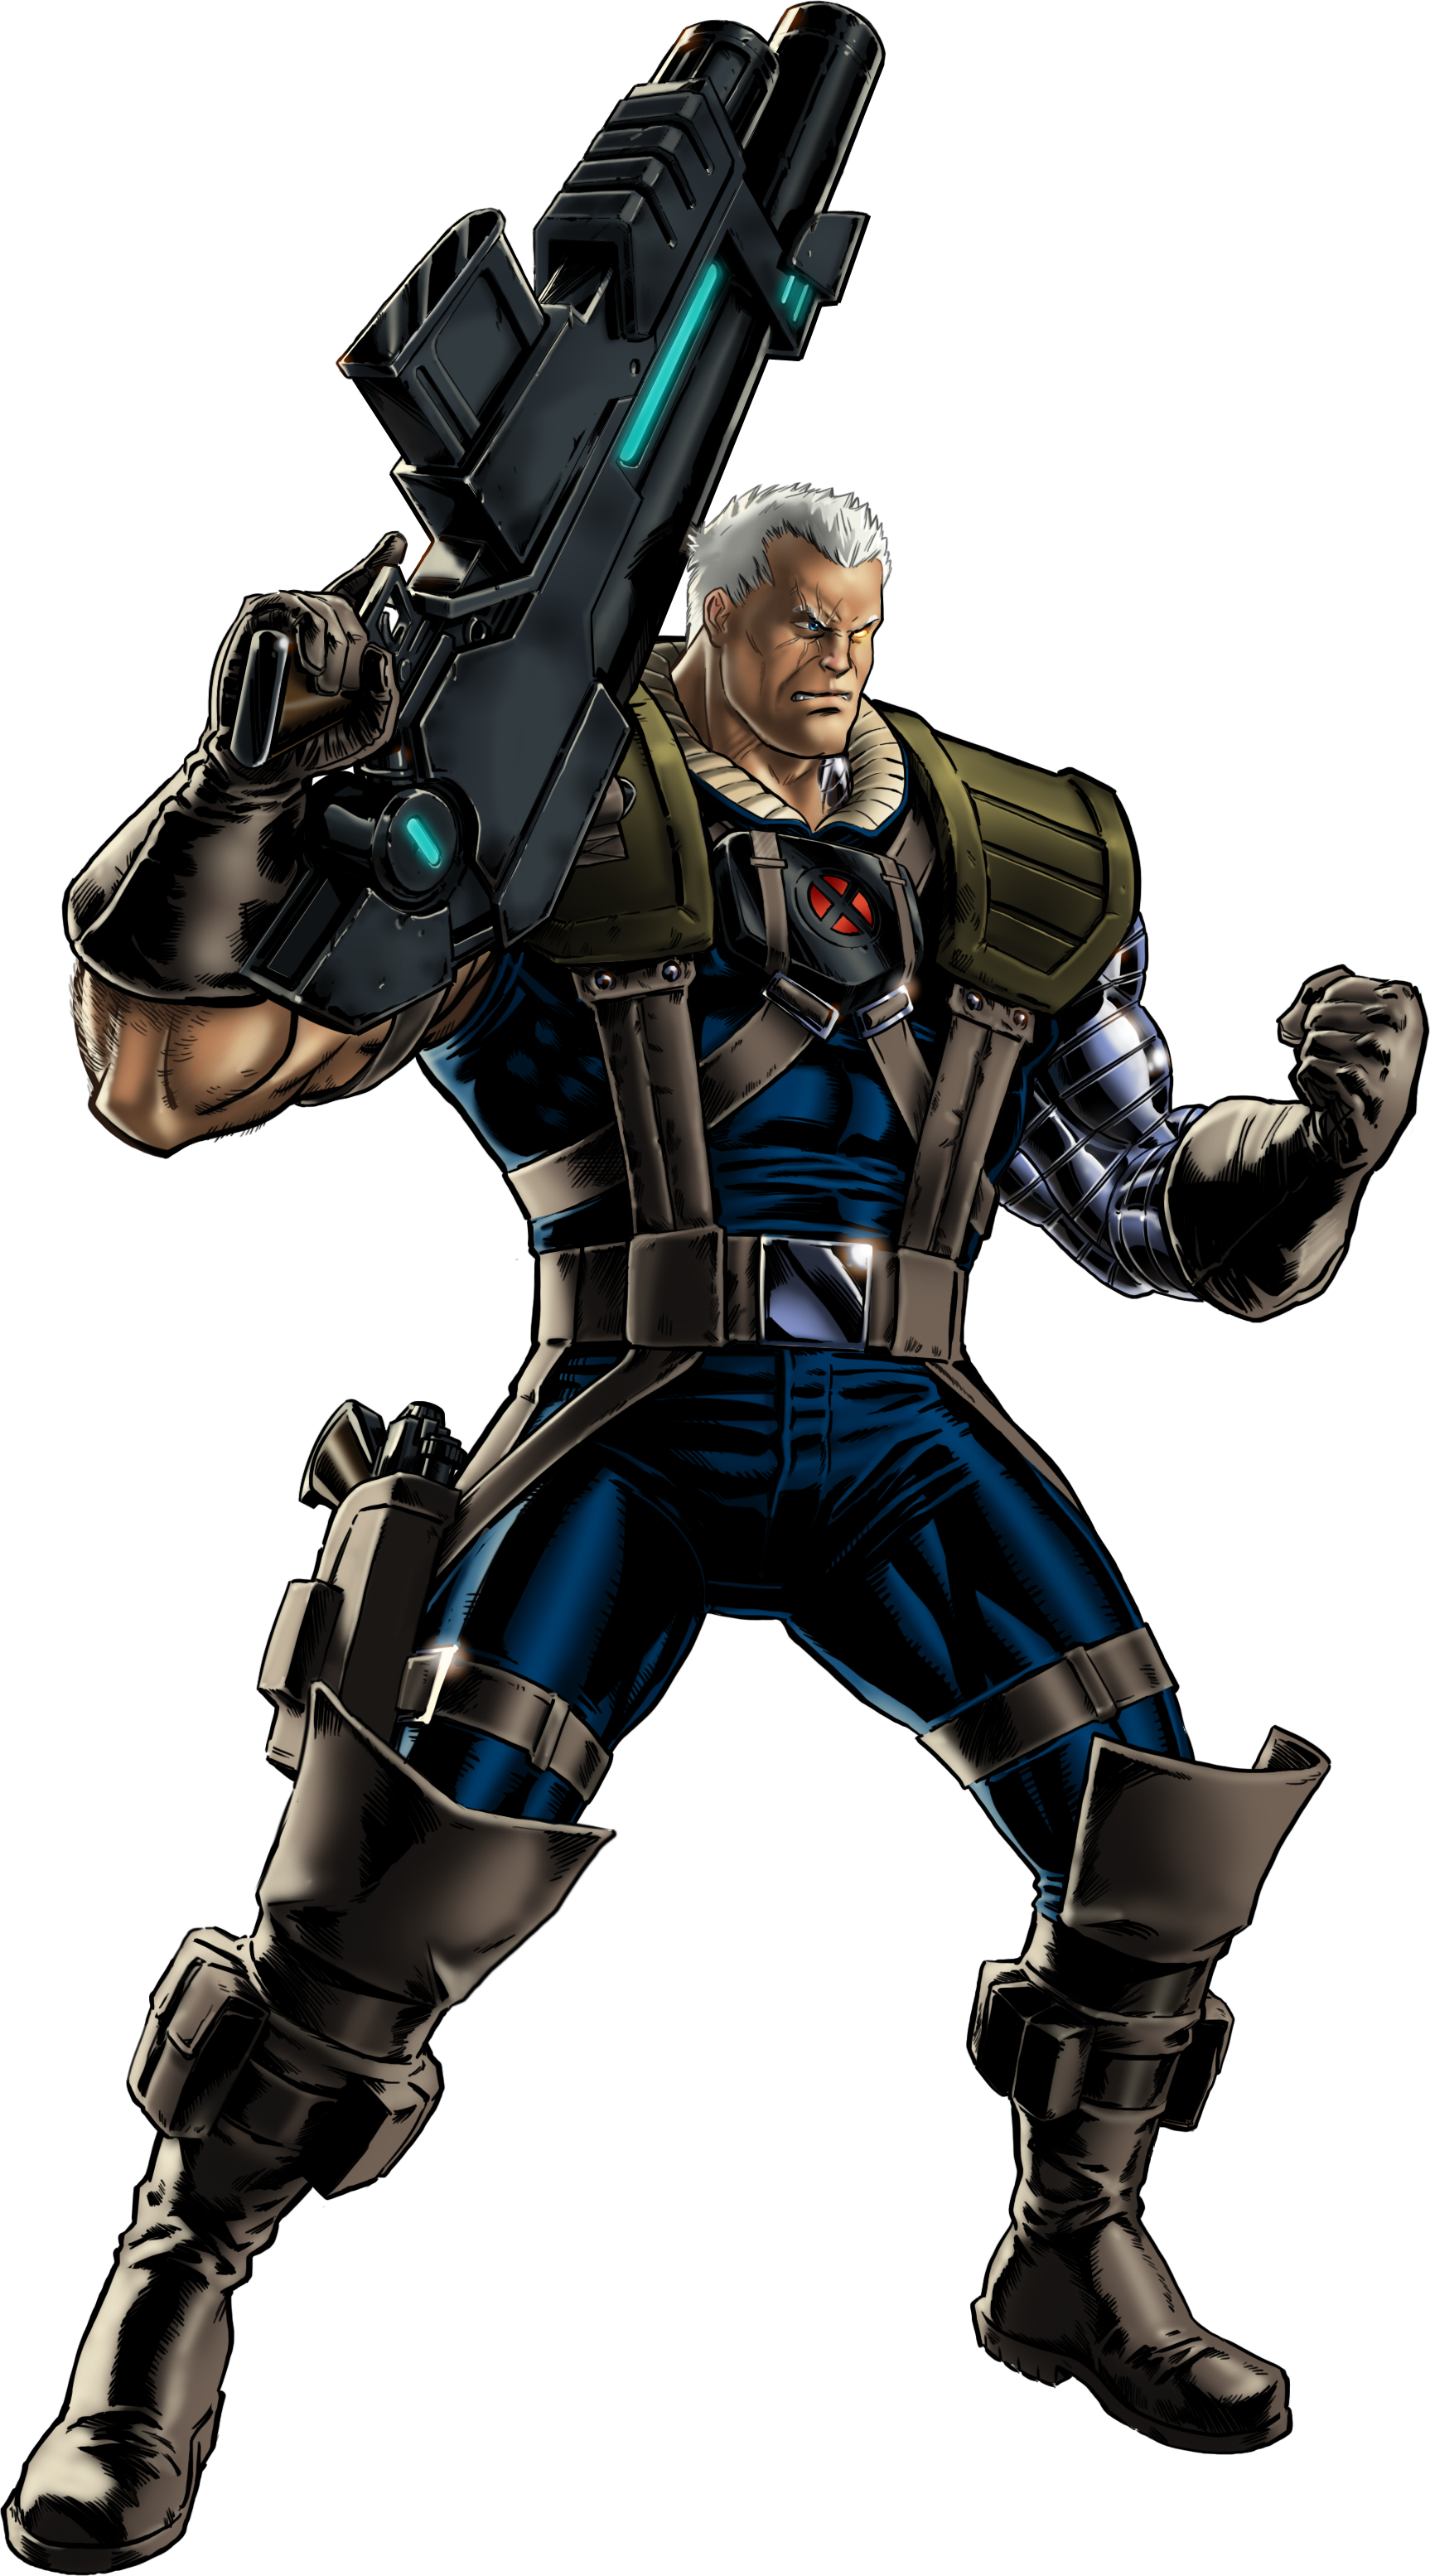 Cable (Canon, Marvel Comics)/MARVEL Future Fight Gamer. Character Stats and Profiles